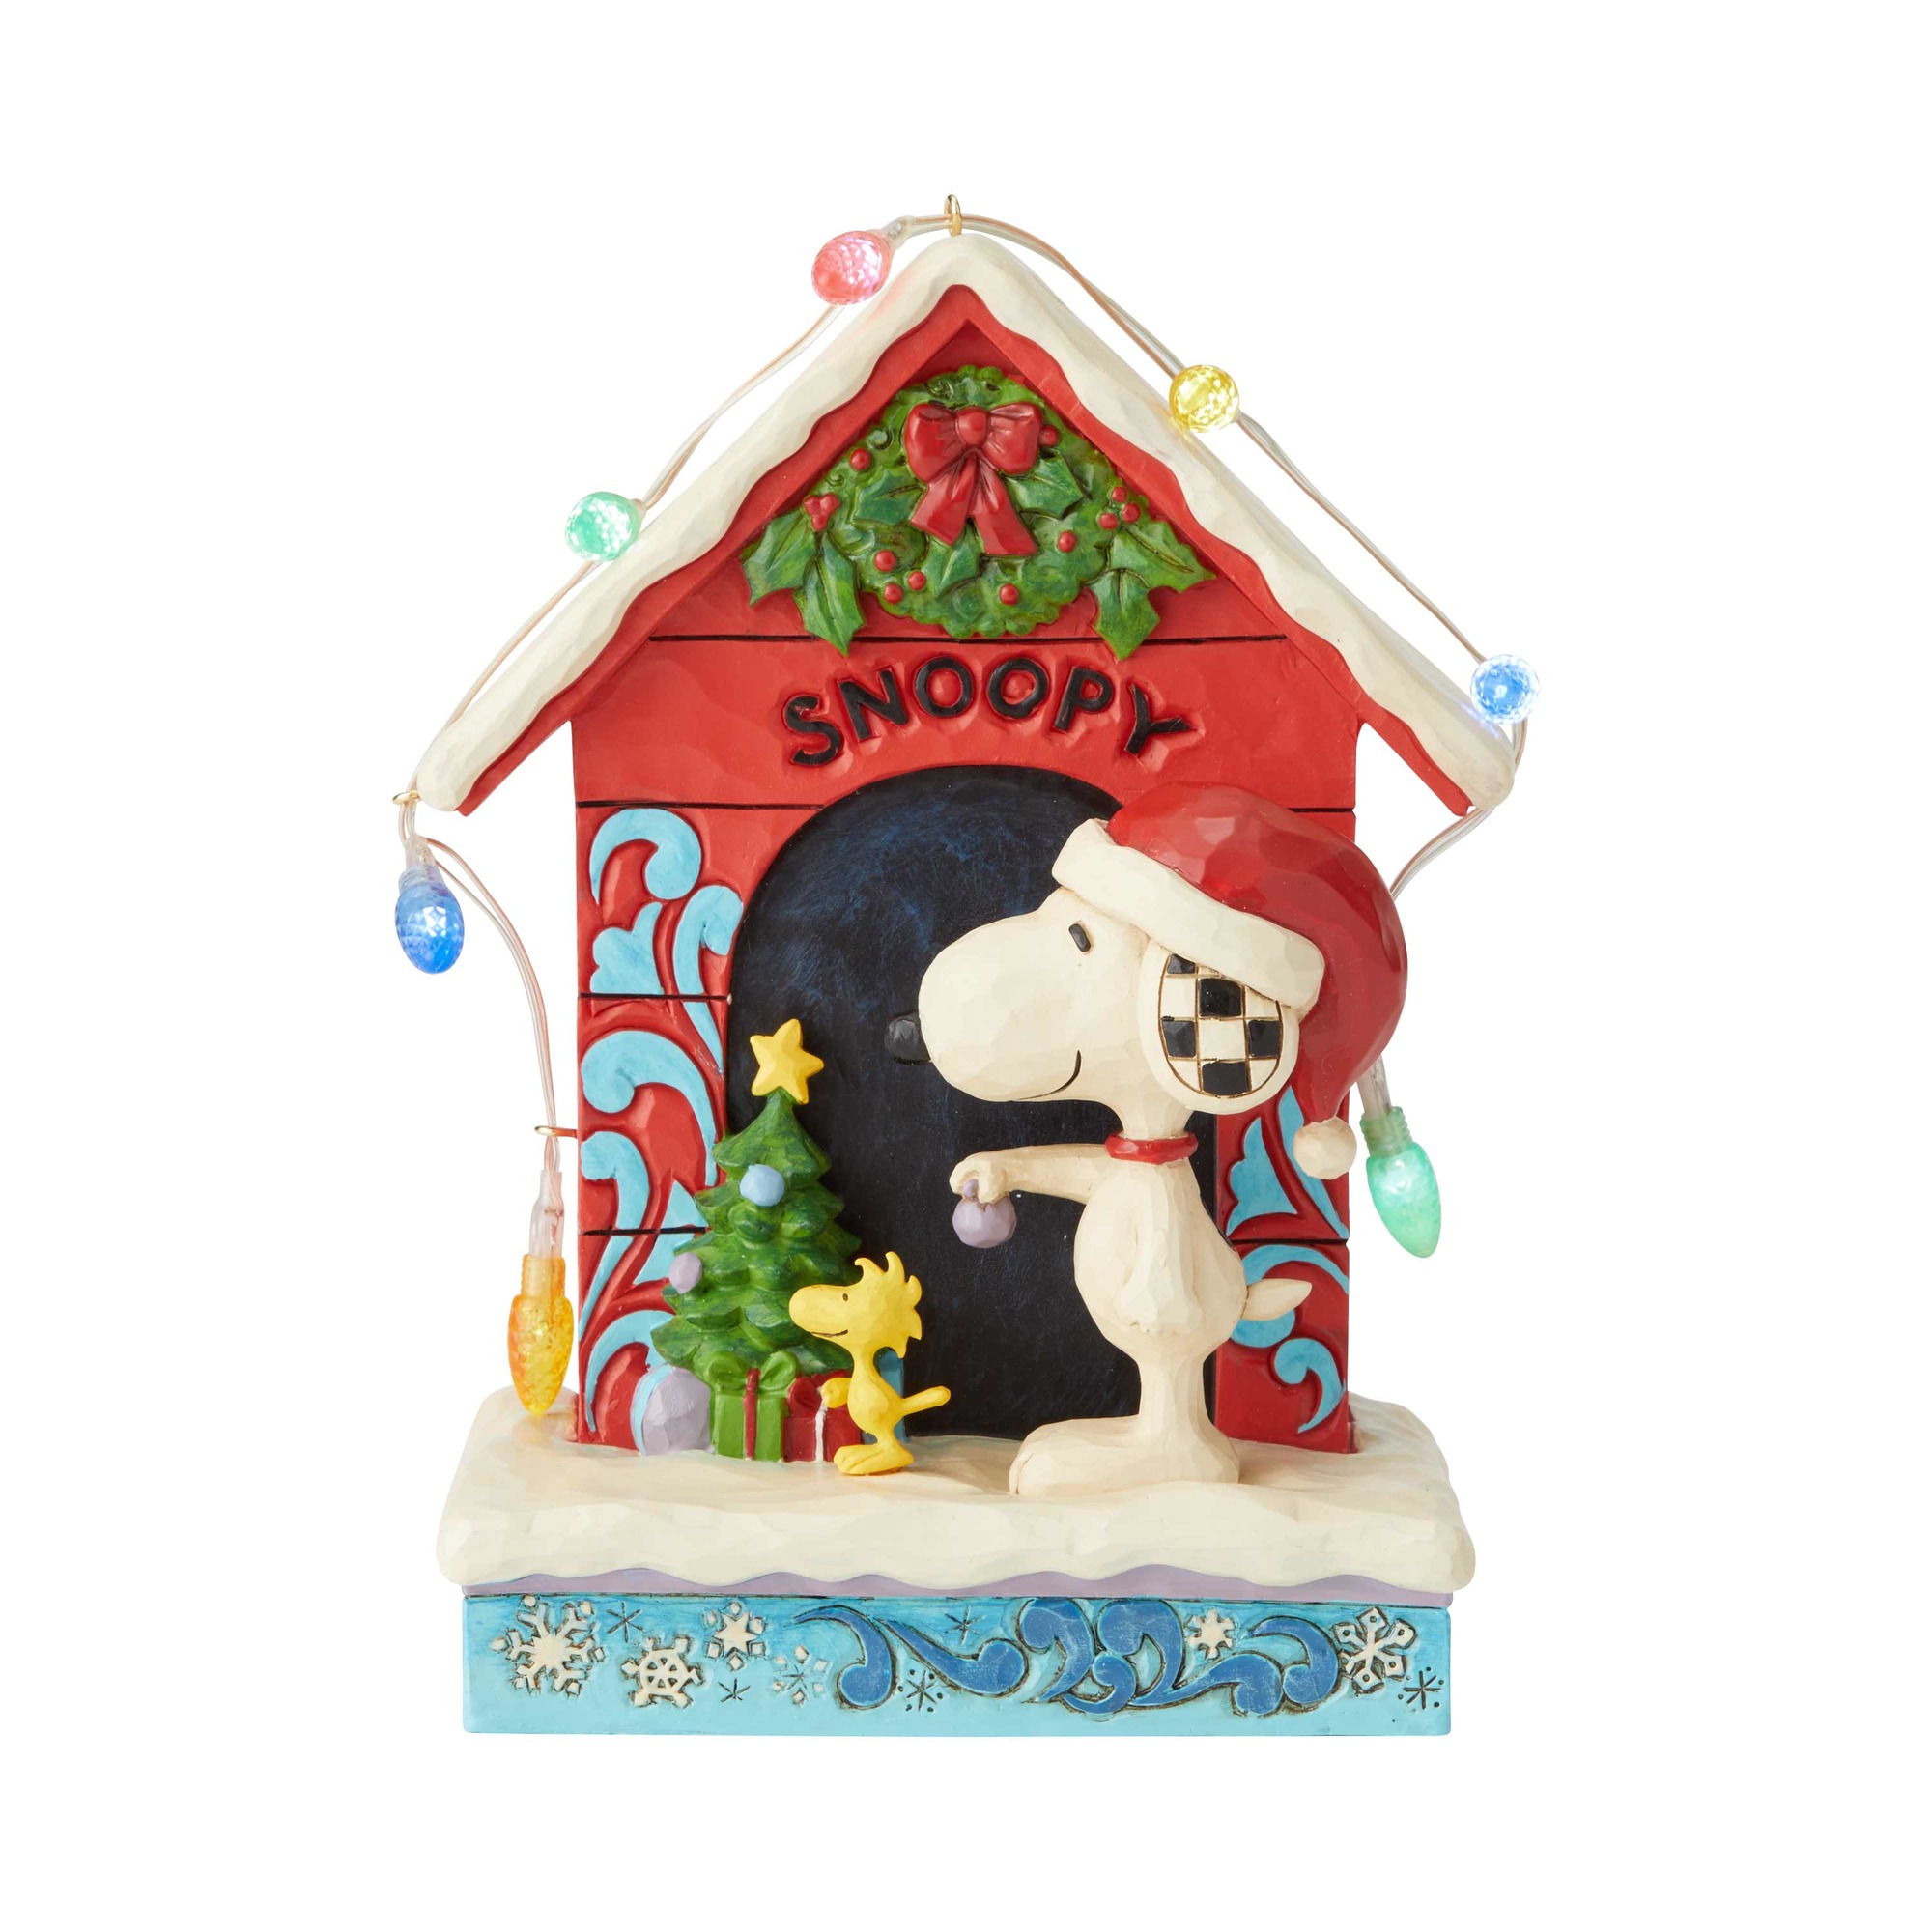 Snoopy by Dog House